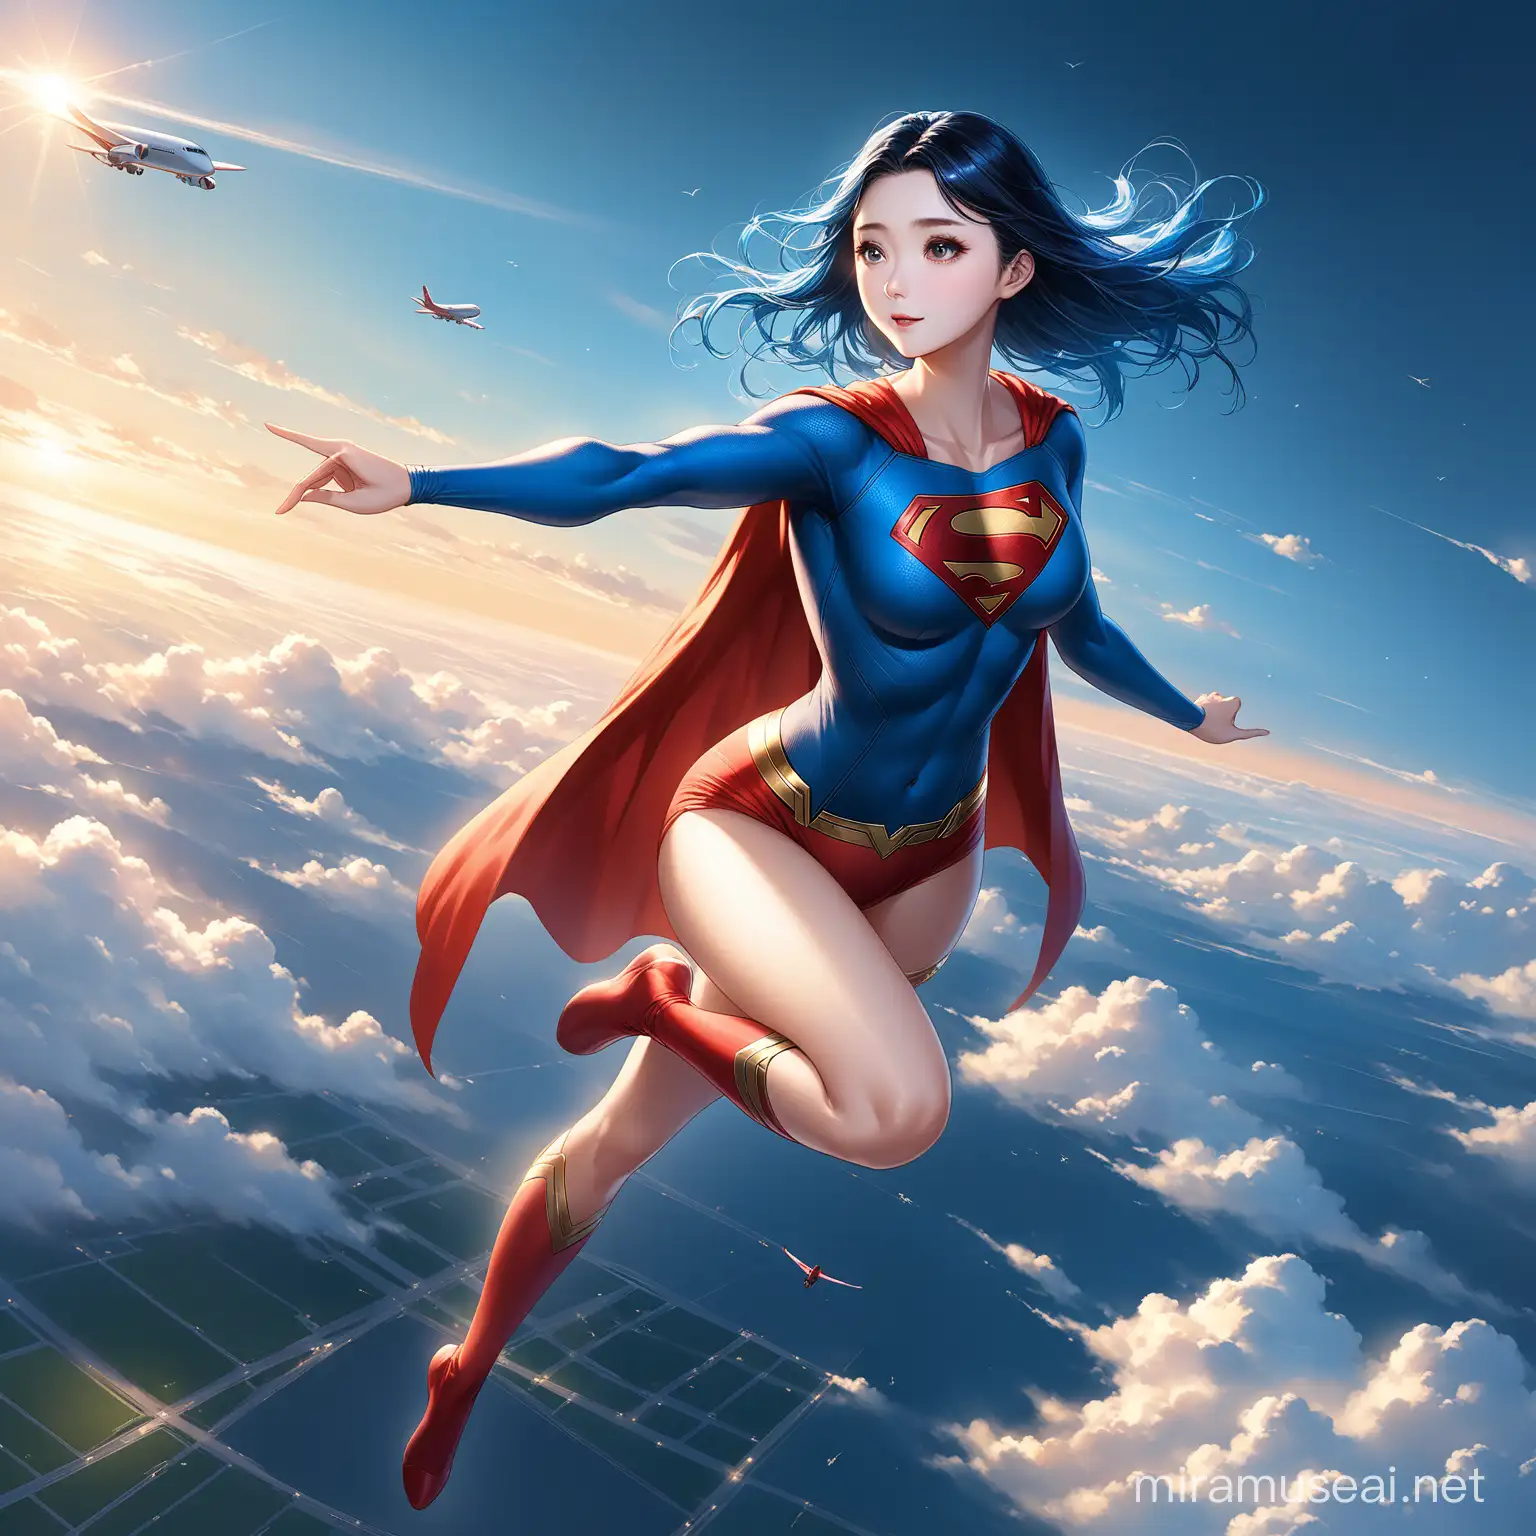 birdview , ultra detail ,SUPER WOMAN real face high nose 28years old fanbingbing WITH THE OUTFIT OF SUPERMAN, out of airplane rightside 70 degree angle ,open blue hair, shining eyelights, super girl long leg extend full body  flying , can saw her outside flying  from  front window to see ouside,cloudy,  